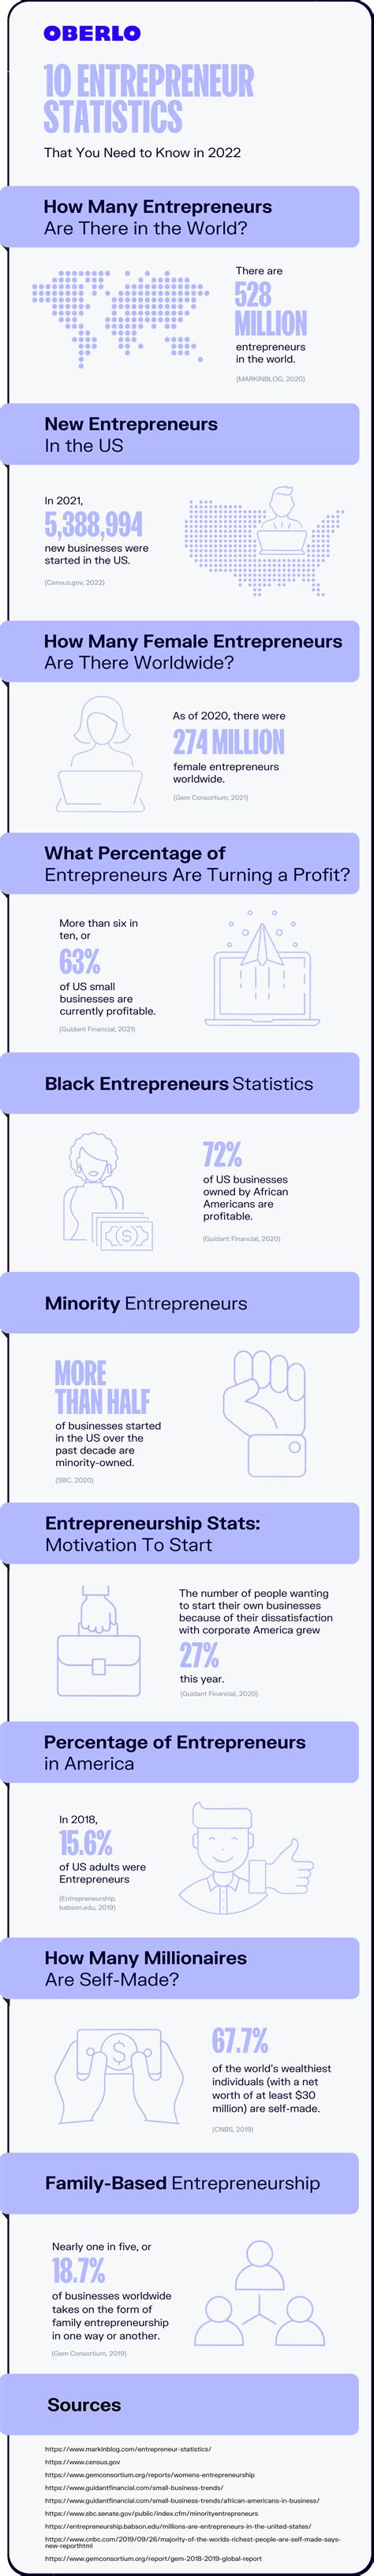 10 Entrepreneur Statistics That You Need To Know In 2022 Infographic